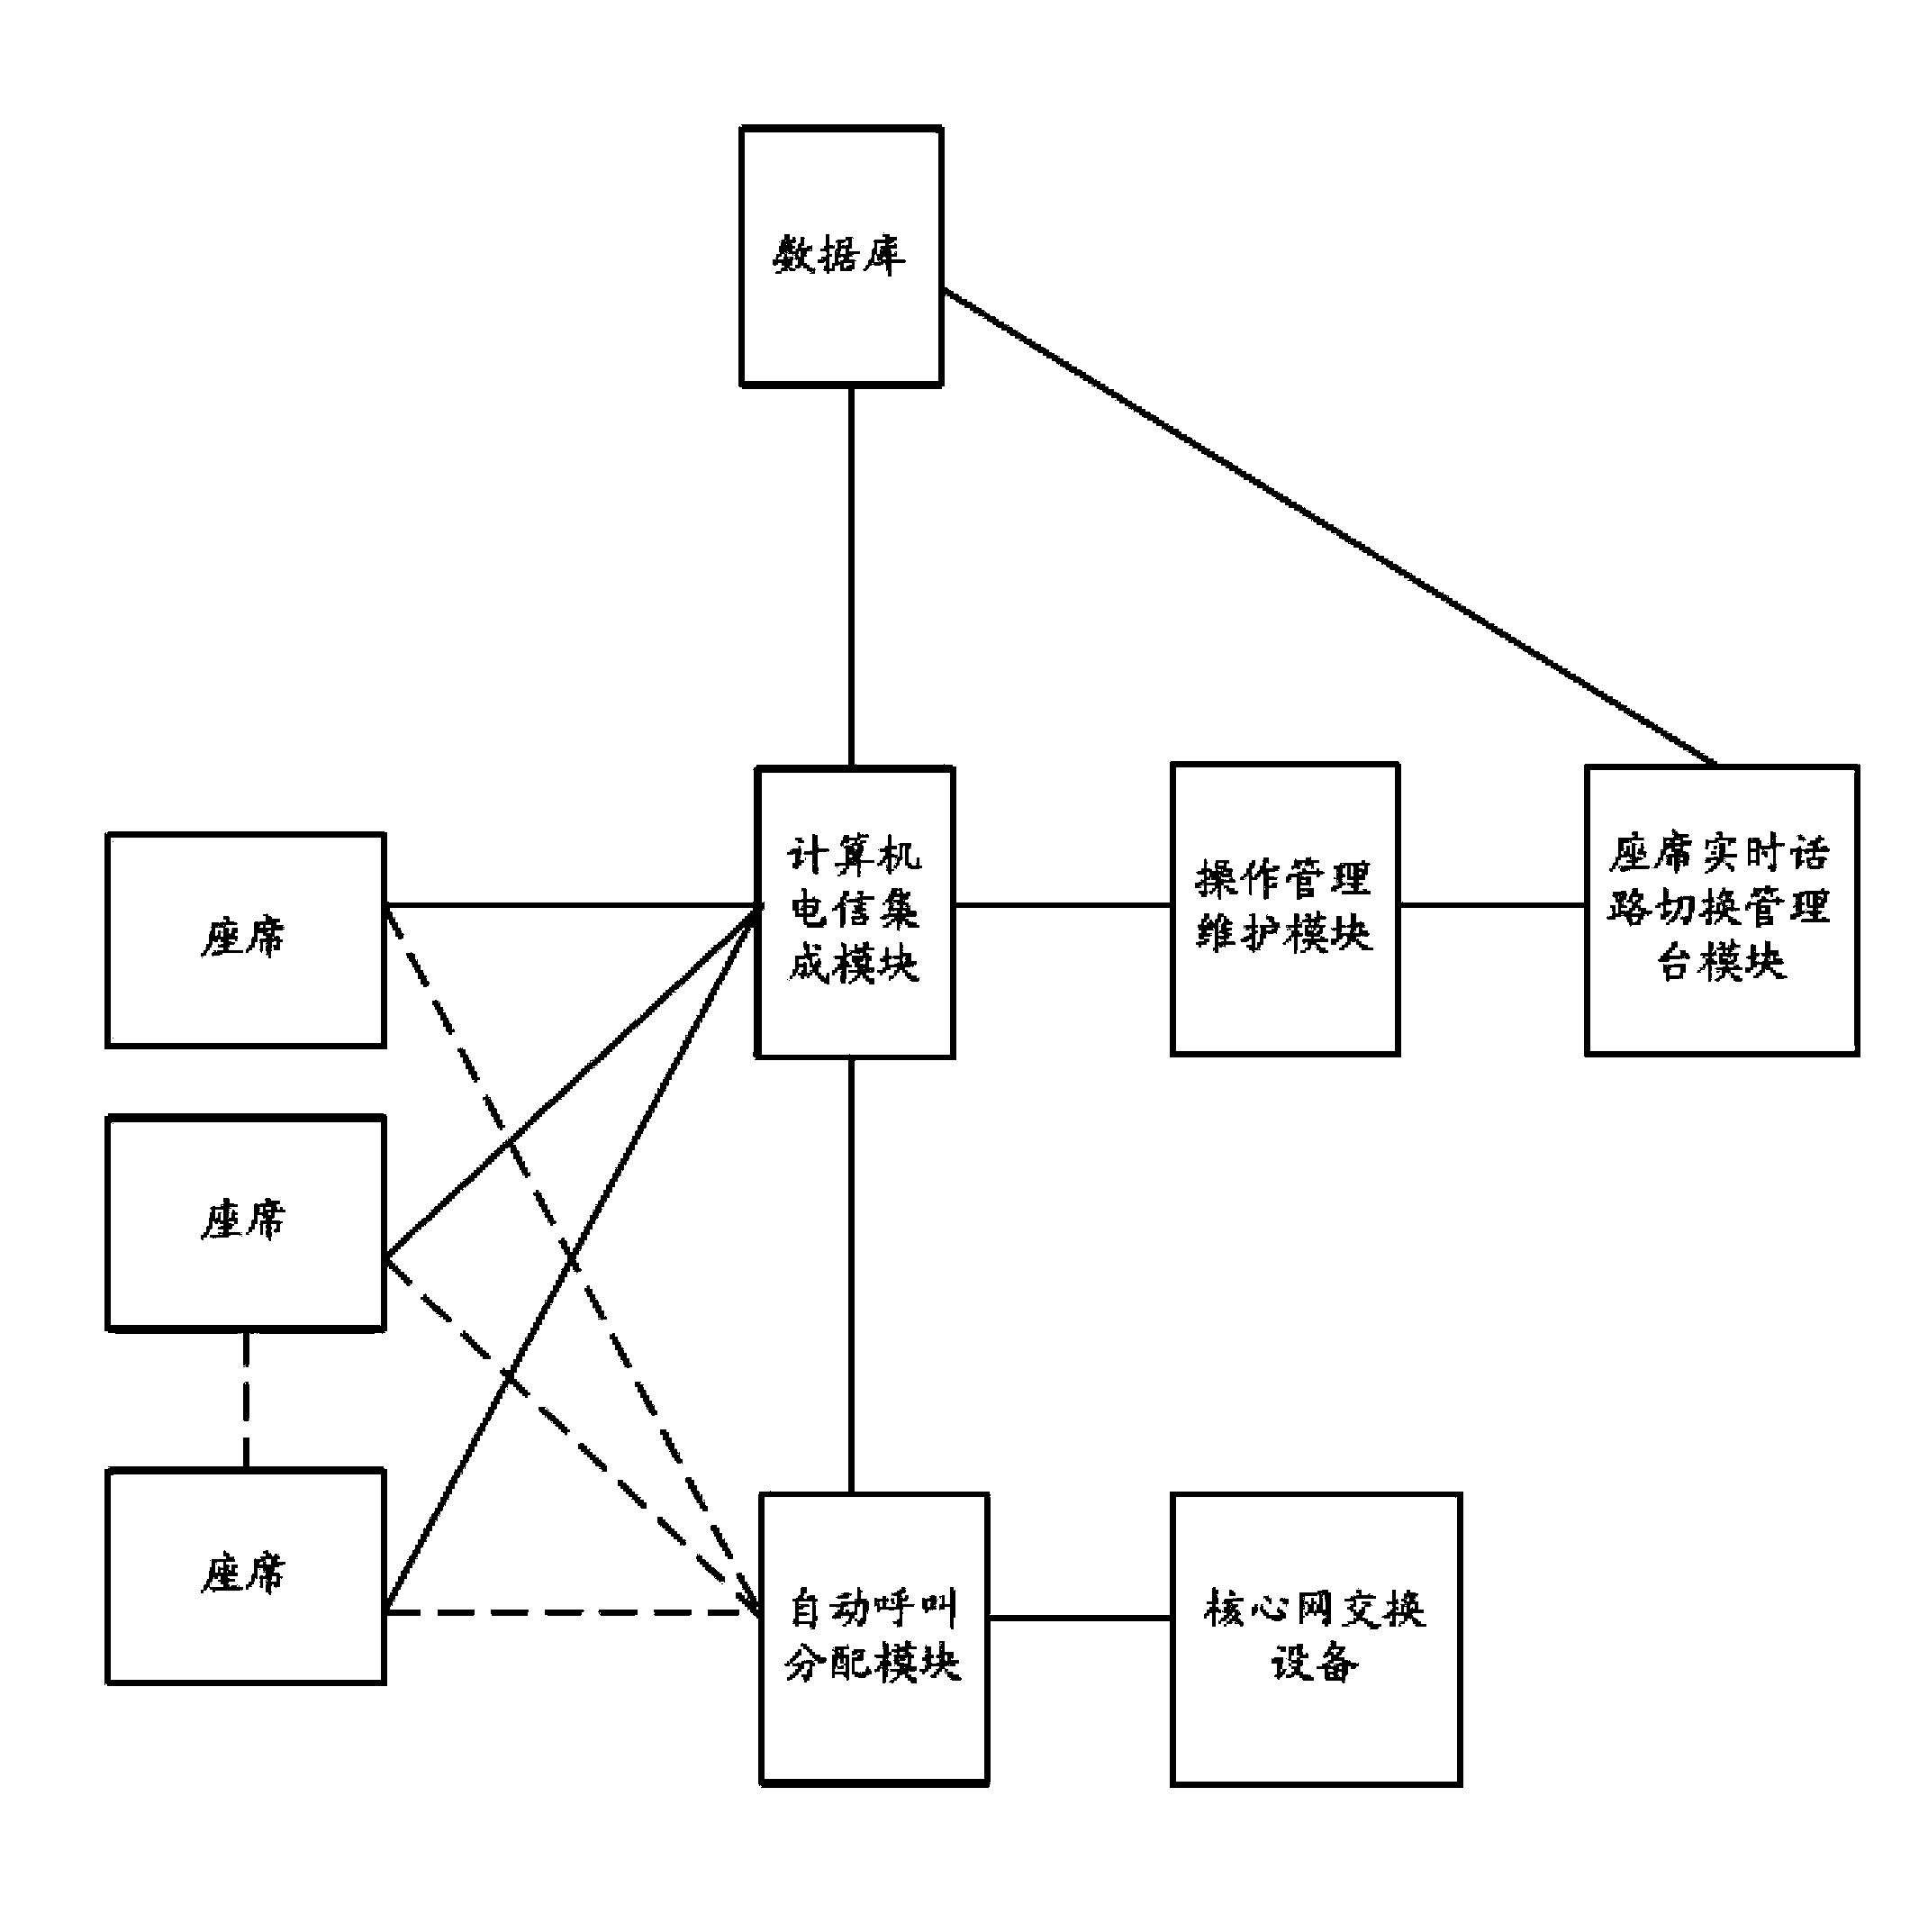 Call center agent service telephone switching system and method